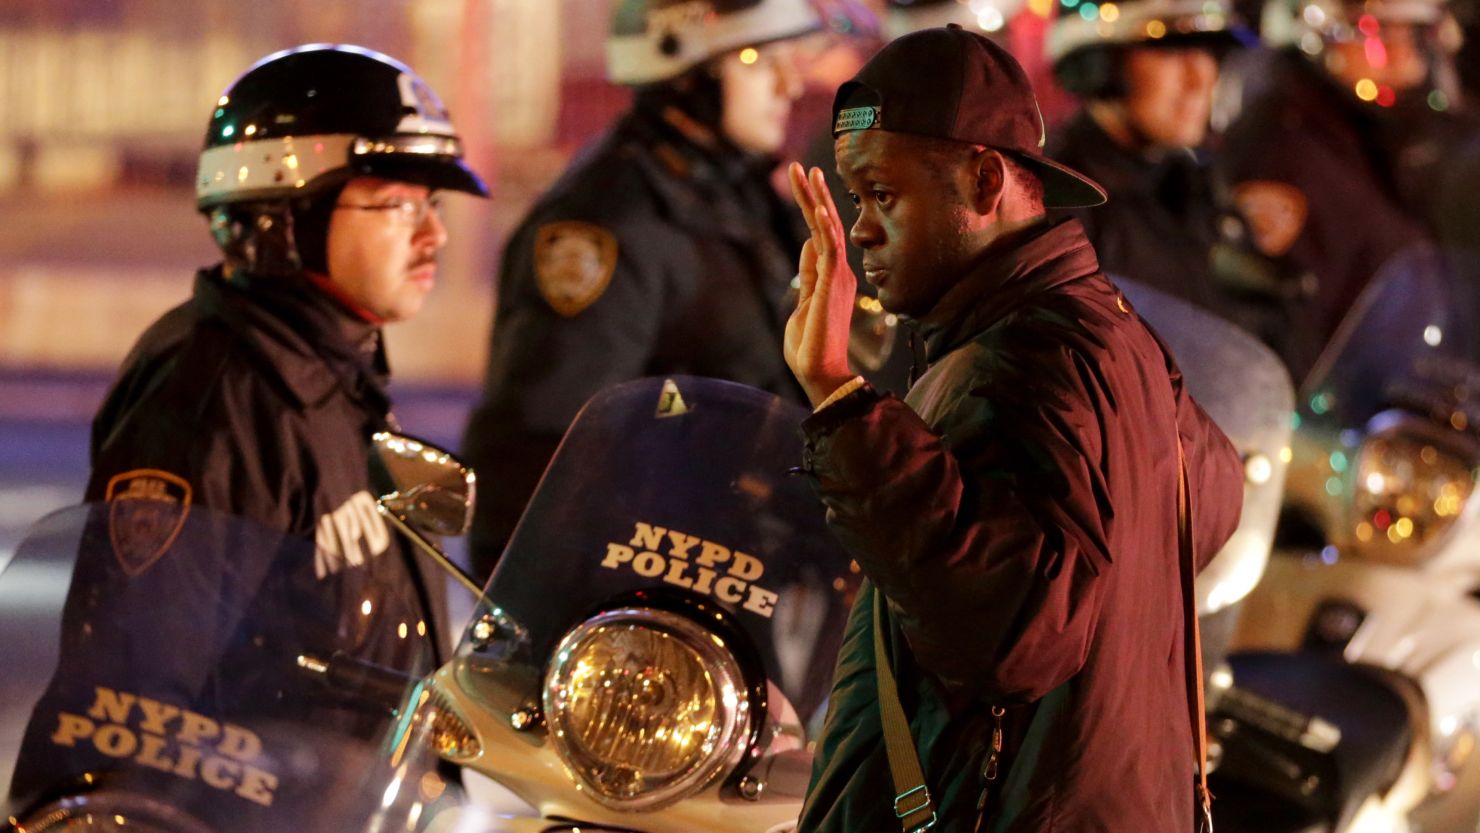 A man stands with his hands raised in front of a line of police officers during a protest after it was announced that the New York City police officer involved in the death of Eric Garner was not indicted, Wednesday, Dec. 3, 2014, in New York. A grand jury cleared the New York City police officer Wednesday in the videotaped chokehold death of Garner, an unarmed black man, who had been stopped on suspicion of selling loose, untaxed cigarettes, a lawyer for the victim's family said. (AP Photo/Julio Cortez)